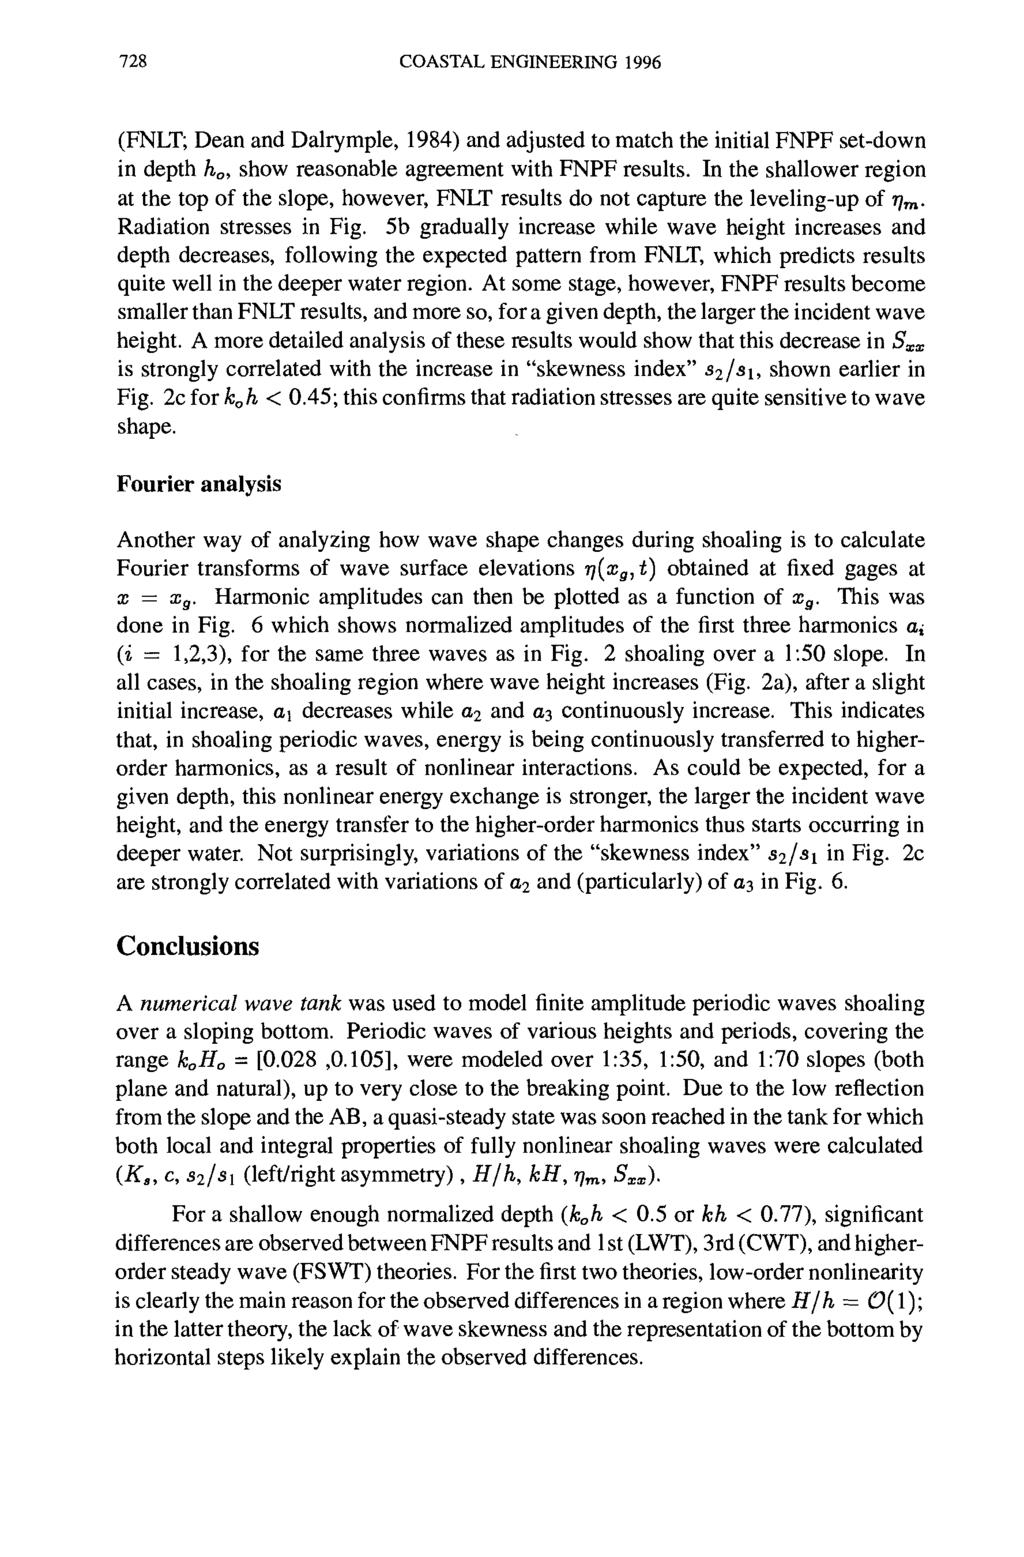 728 COASTAL ENGINEERING 1996 (FNLT; Dean and Dalrymple, 1984) and adjusted to match the initial FNPF set-down in depth h 0, show reasonable agreement with FNPF results.